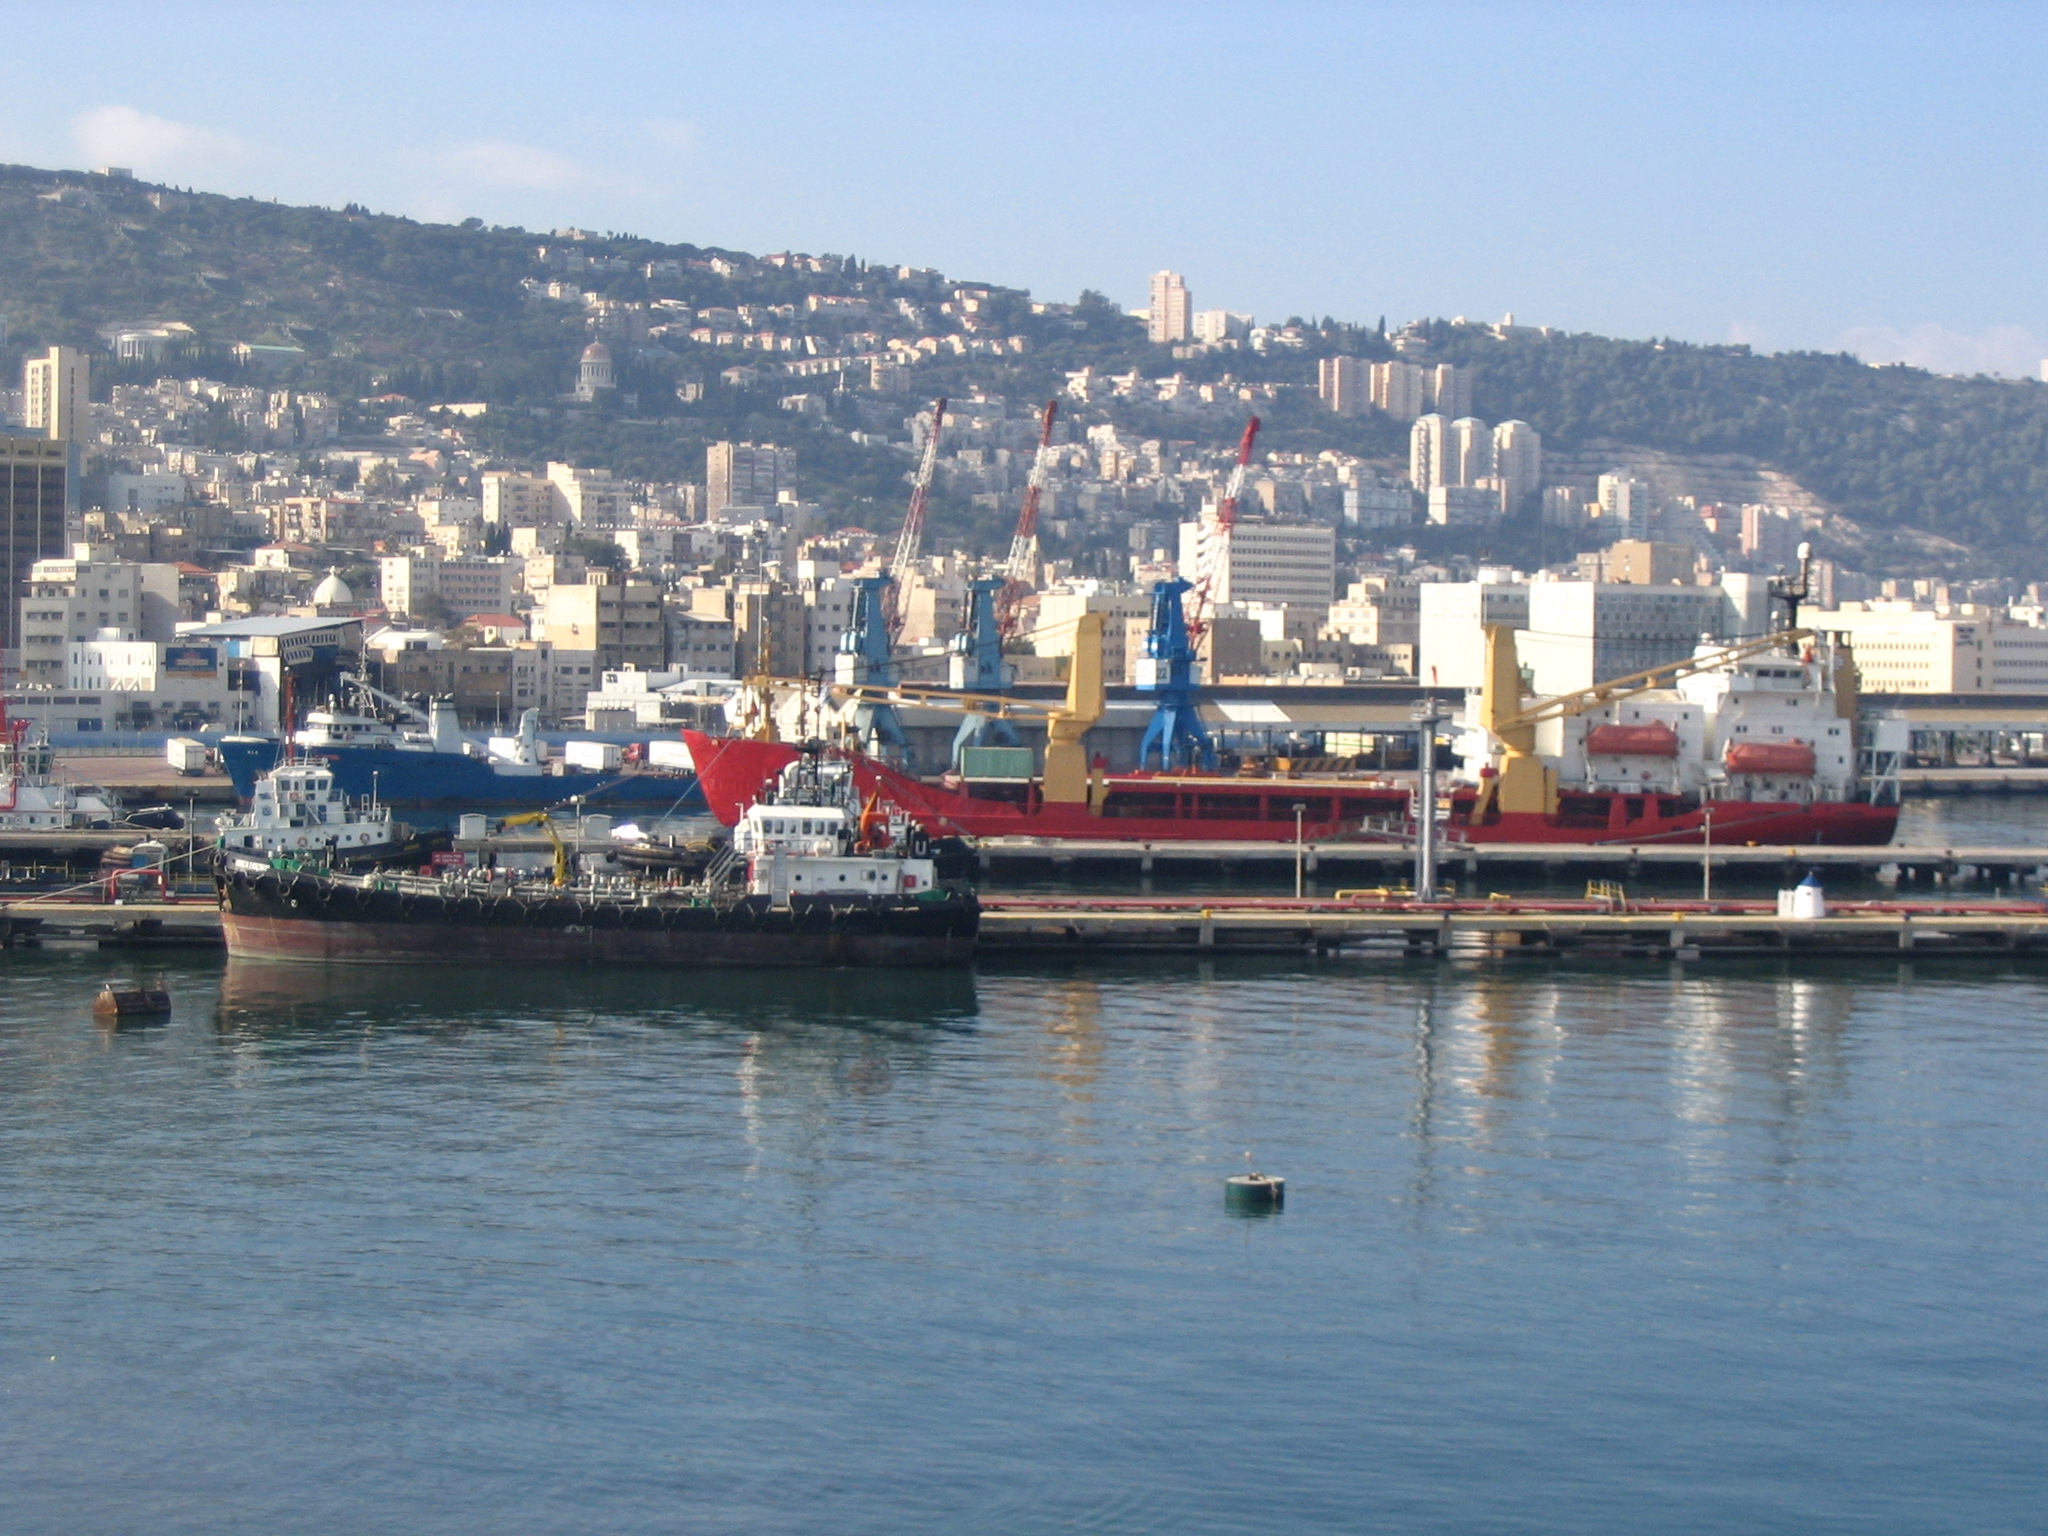 http://upload.wikimedia.org/wikipedia/commons/d/d3/Port_of_Haifa,_viewed_from_the_sea.jpg